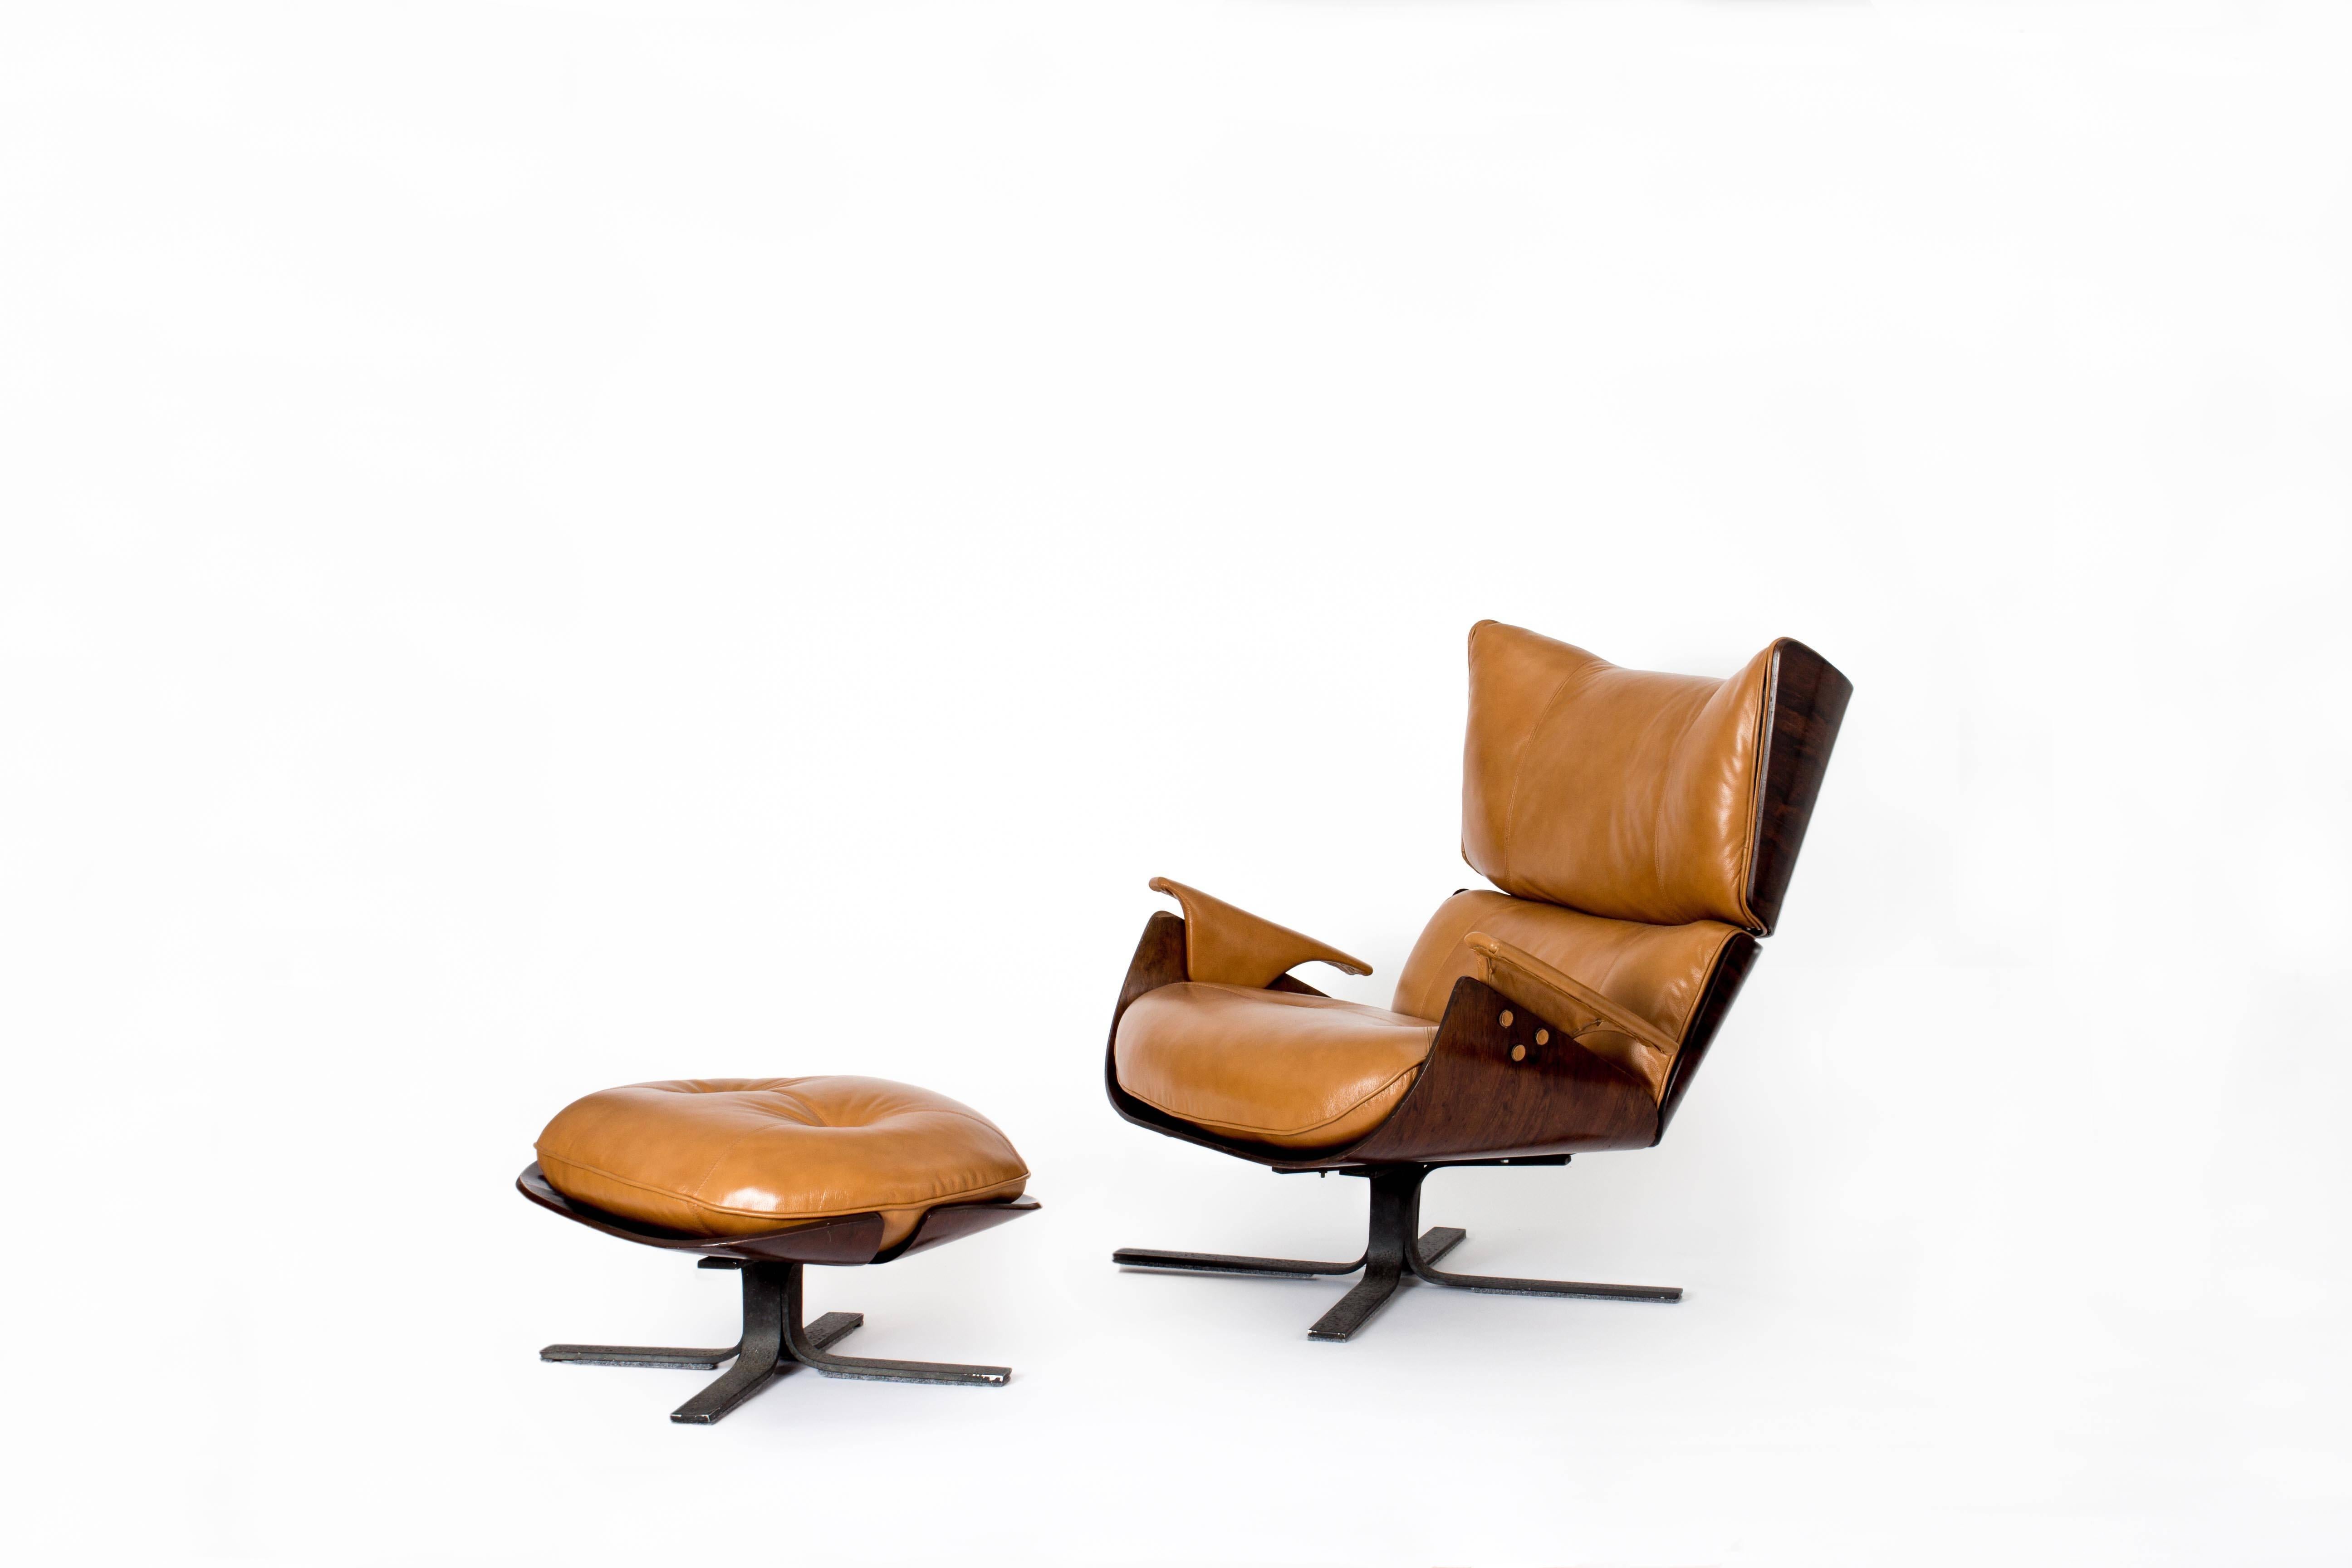 Paulistana lounge chair and ottoman designed by Jorge Zalszupin. This beautiful chair in cognac leather and Brazilian plywood comes from the personal collection of Oscar Niemeyer.

The design and comfortable appearance is reminiscent of the famous